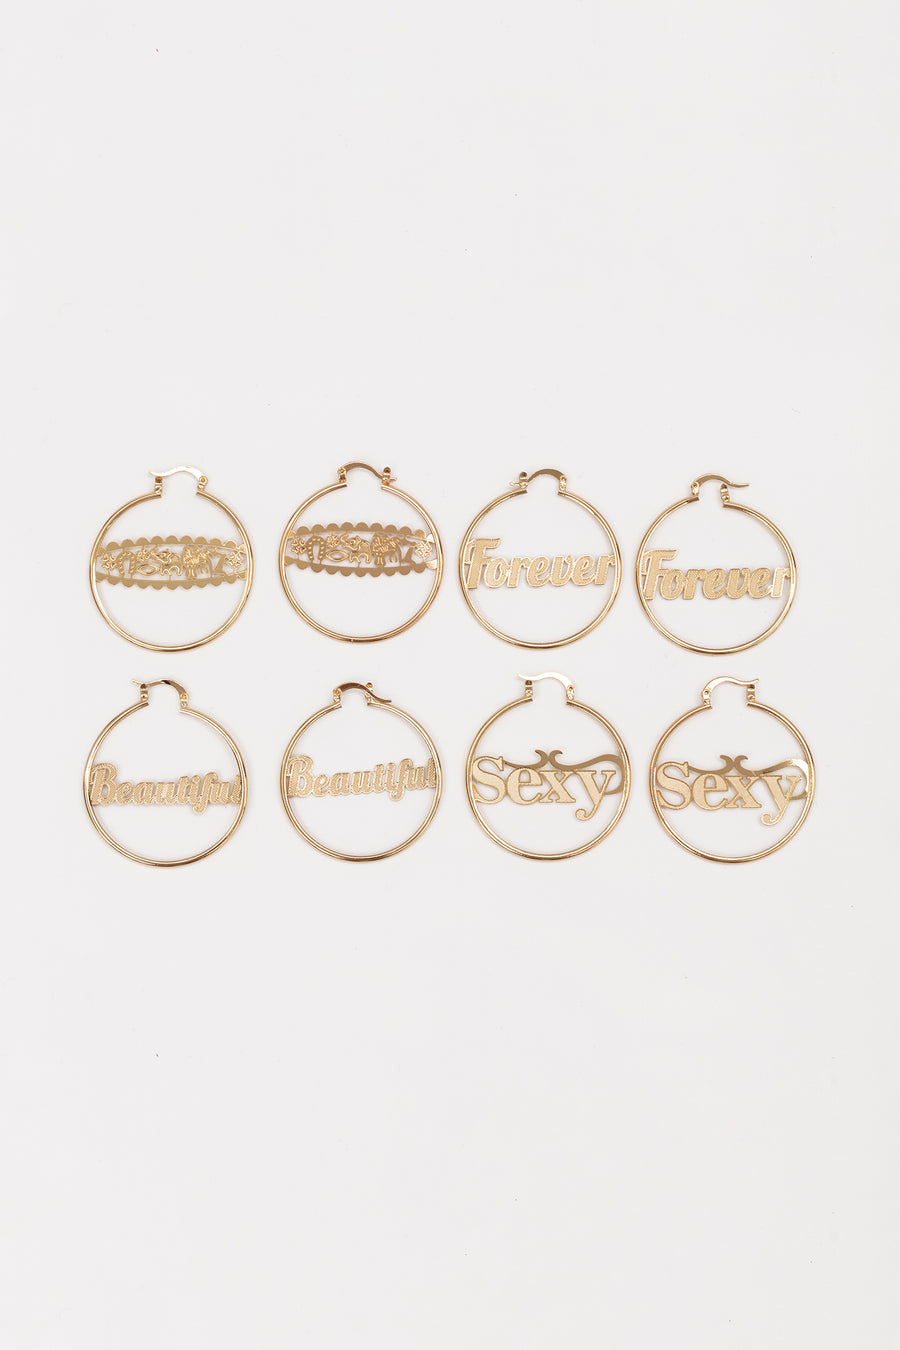 Hoop Earrings, 4 Styles: Beautiful, Lucky, Forever, Sexy